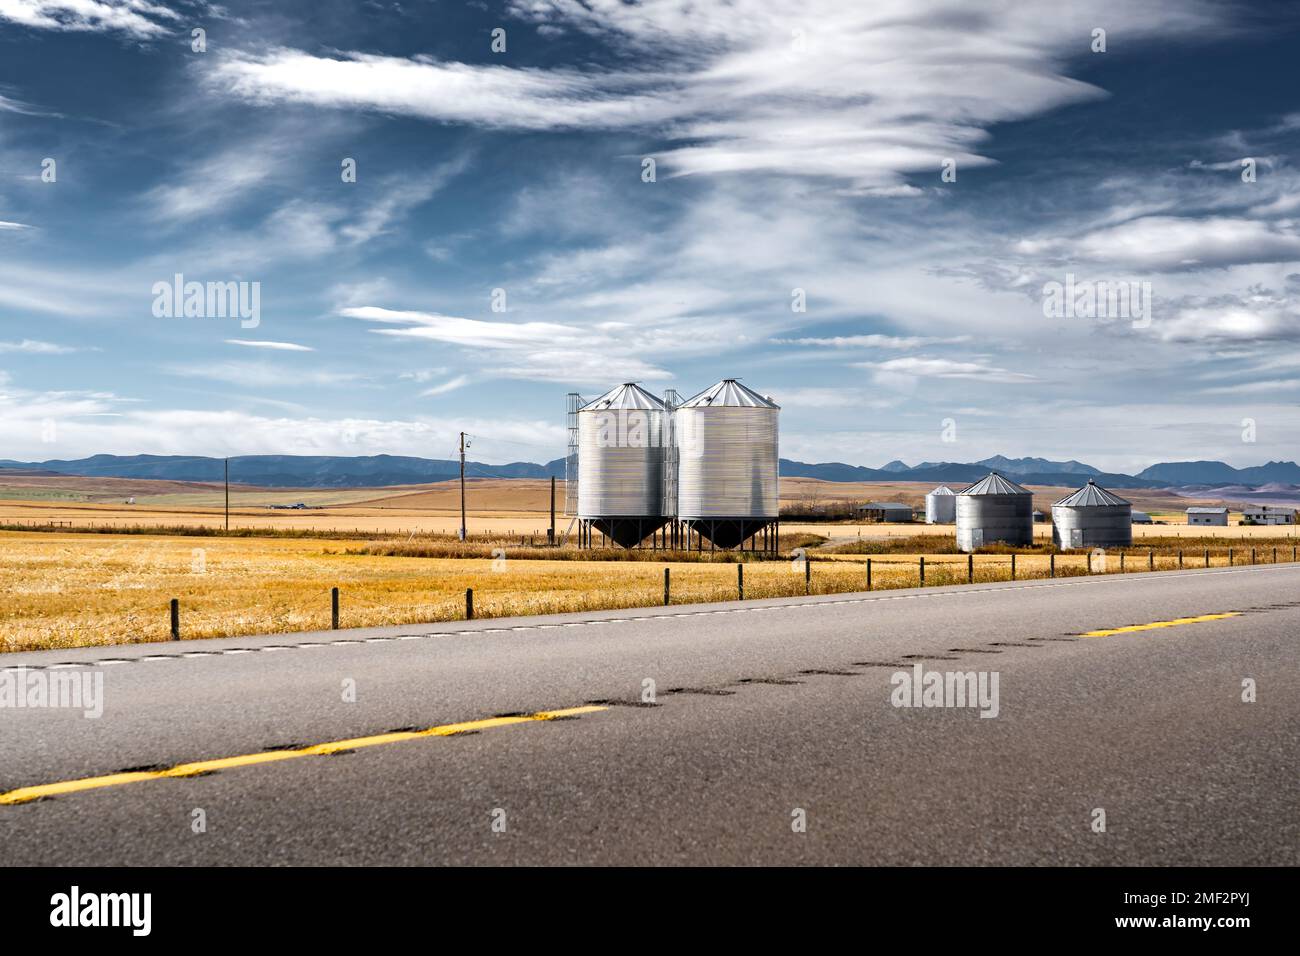 Pair of steel grain silos standing next to a divided highway along harvested fields and distant Rocky Mountains at background near Longview Alberta Ca Stock Photo